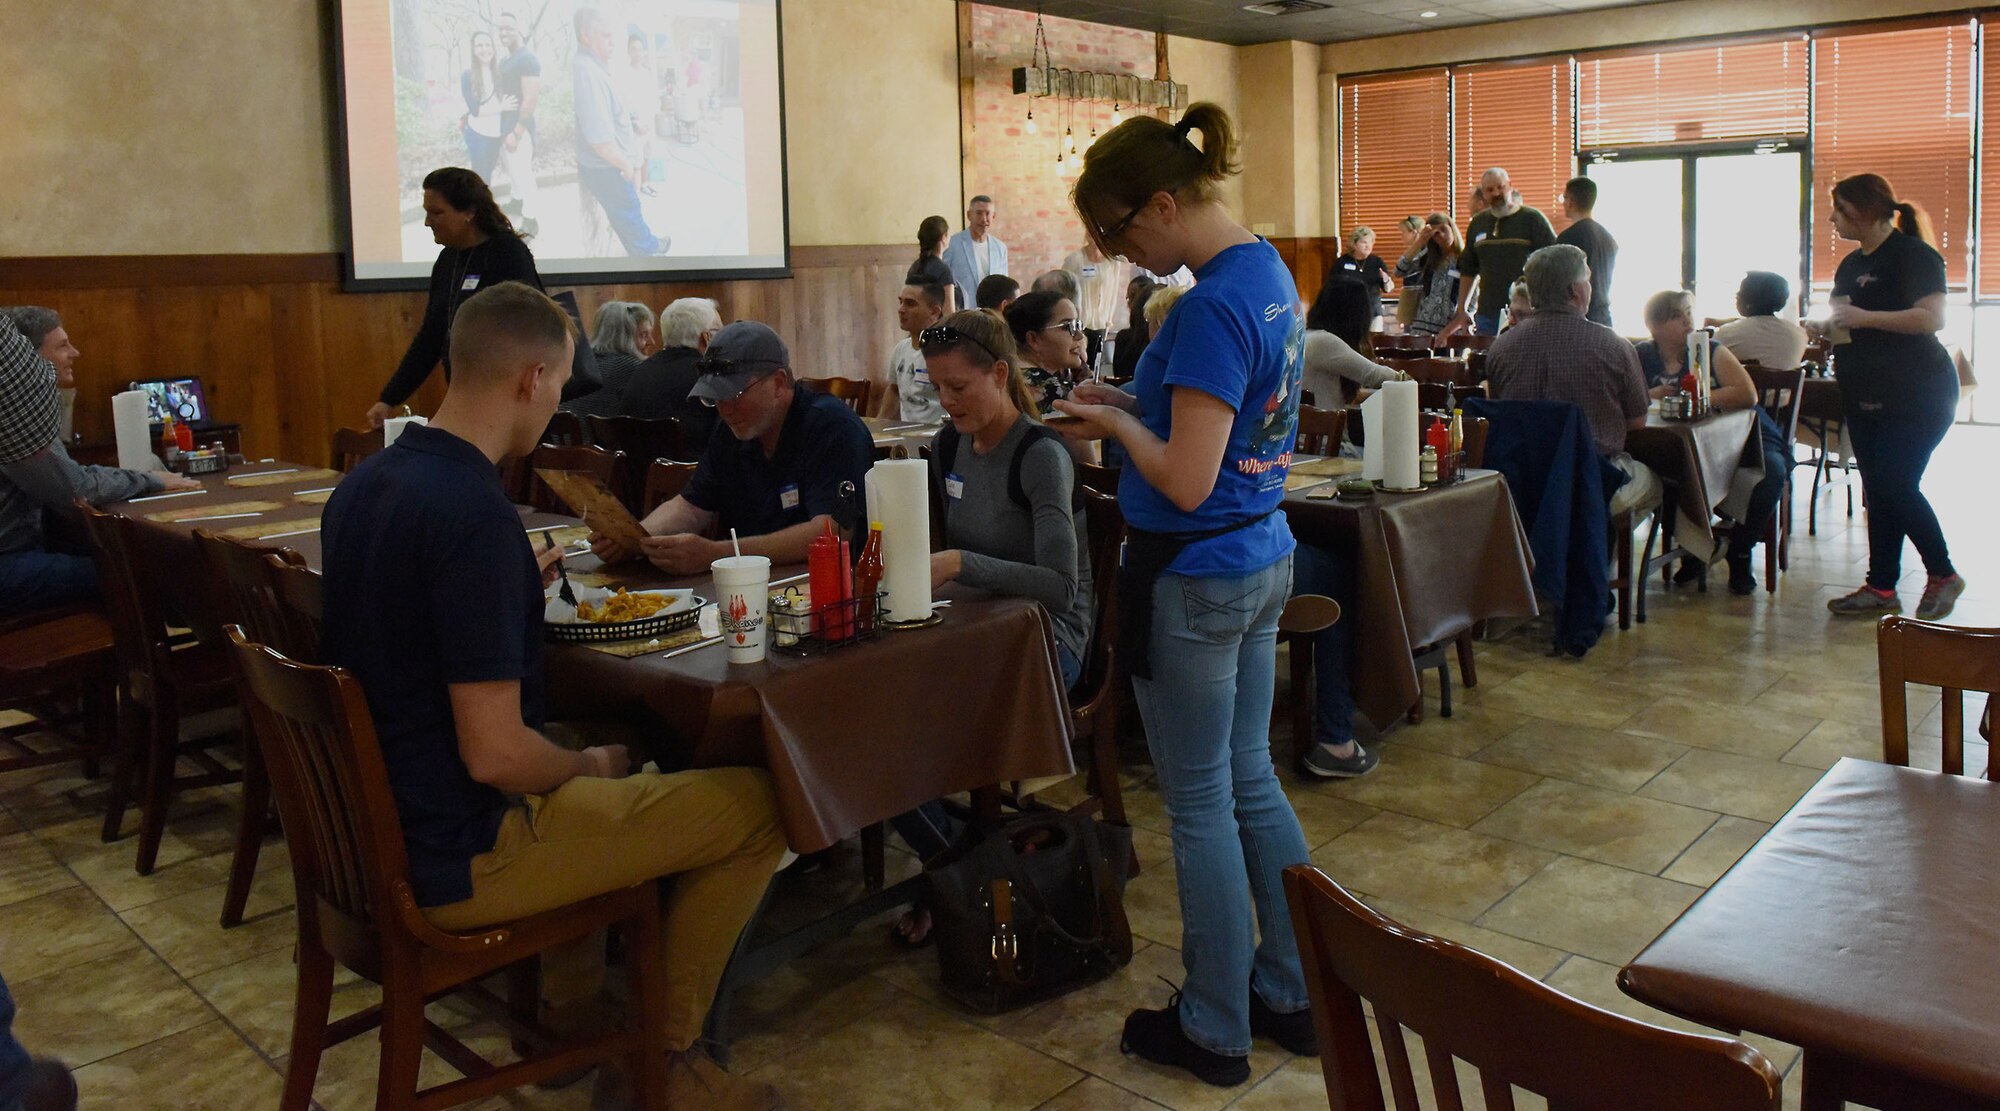 Airmen and their host families at the Roots for Boots kickoff event at Shane’s Seafood and BBQ in Bossier City, La., April 30, 2017. Host families bring Airmen in for holidays and other events when they cannot celebrate with their families back home. (U.S. Air Force Photo/Airman 1st Class Sydney Bennett)